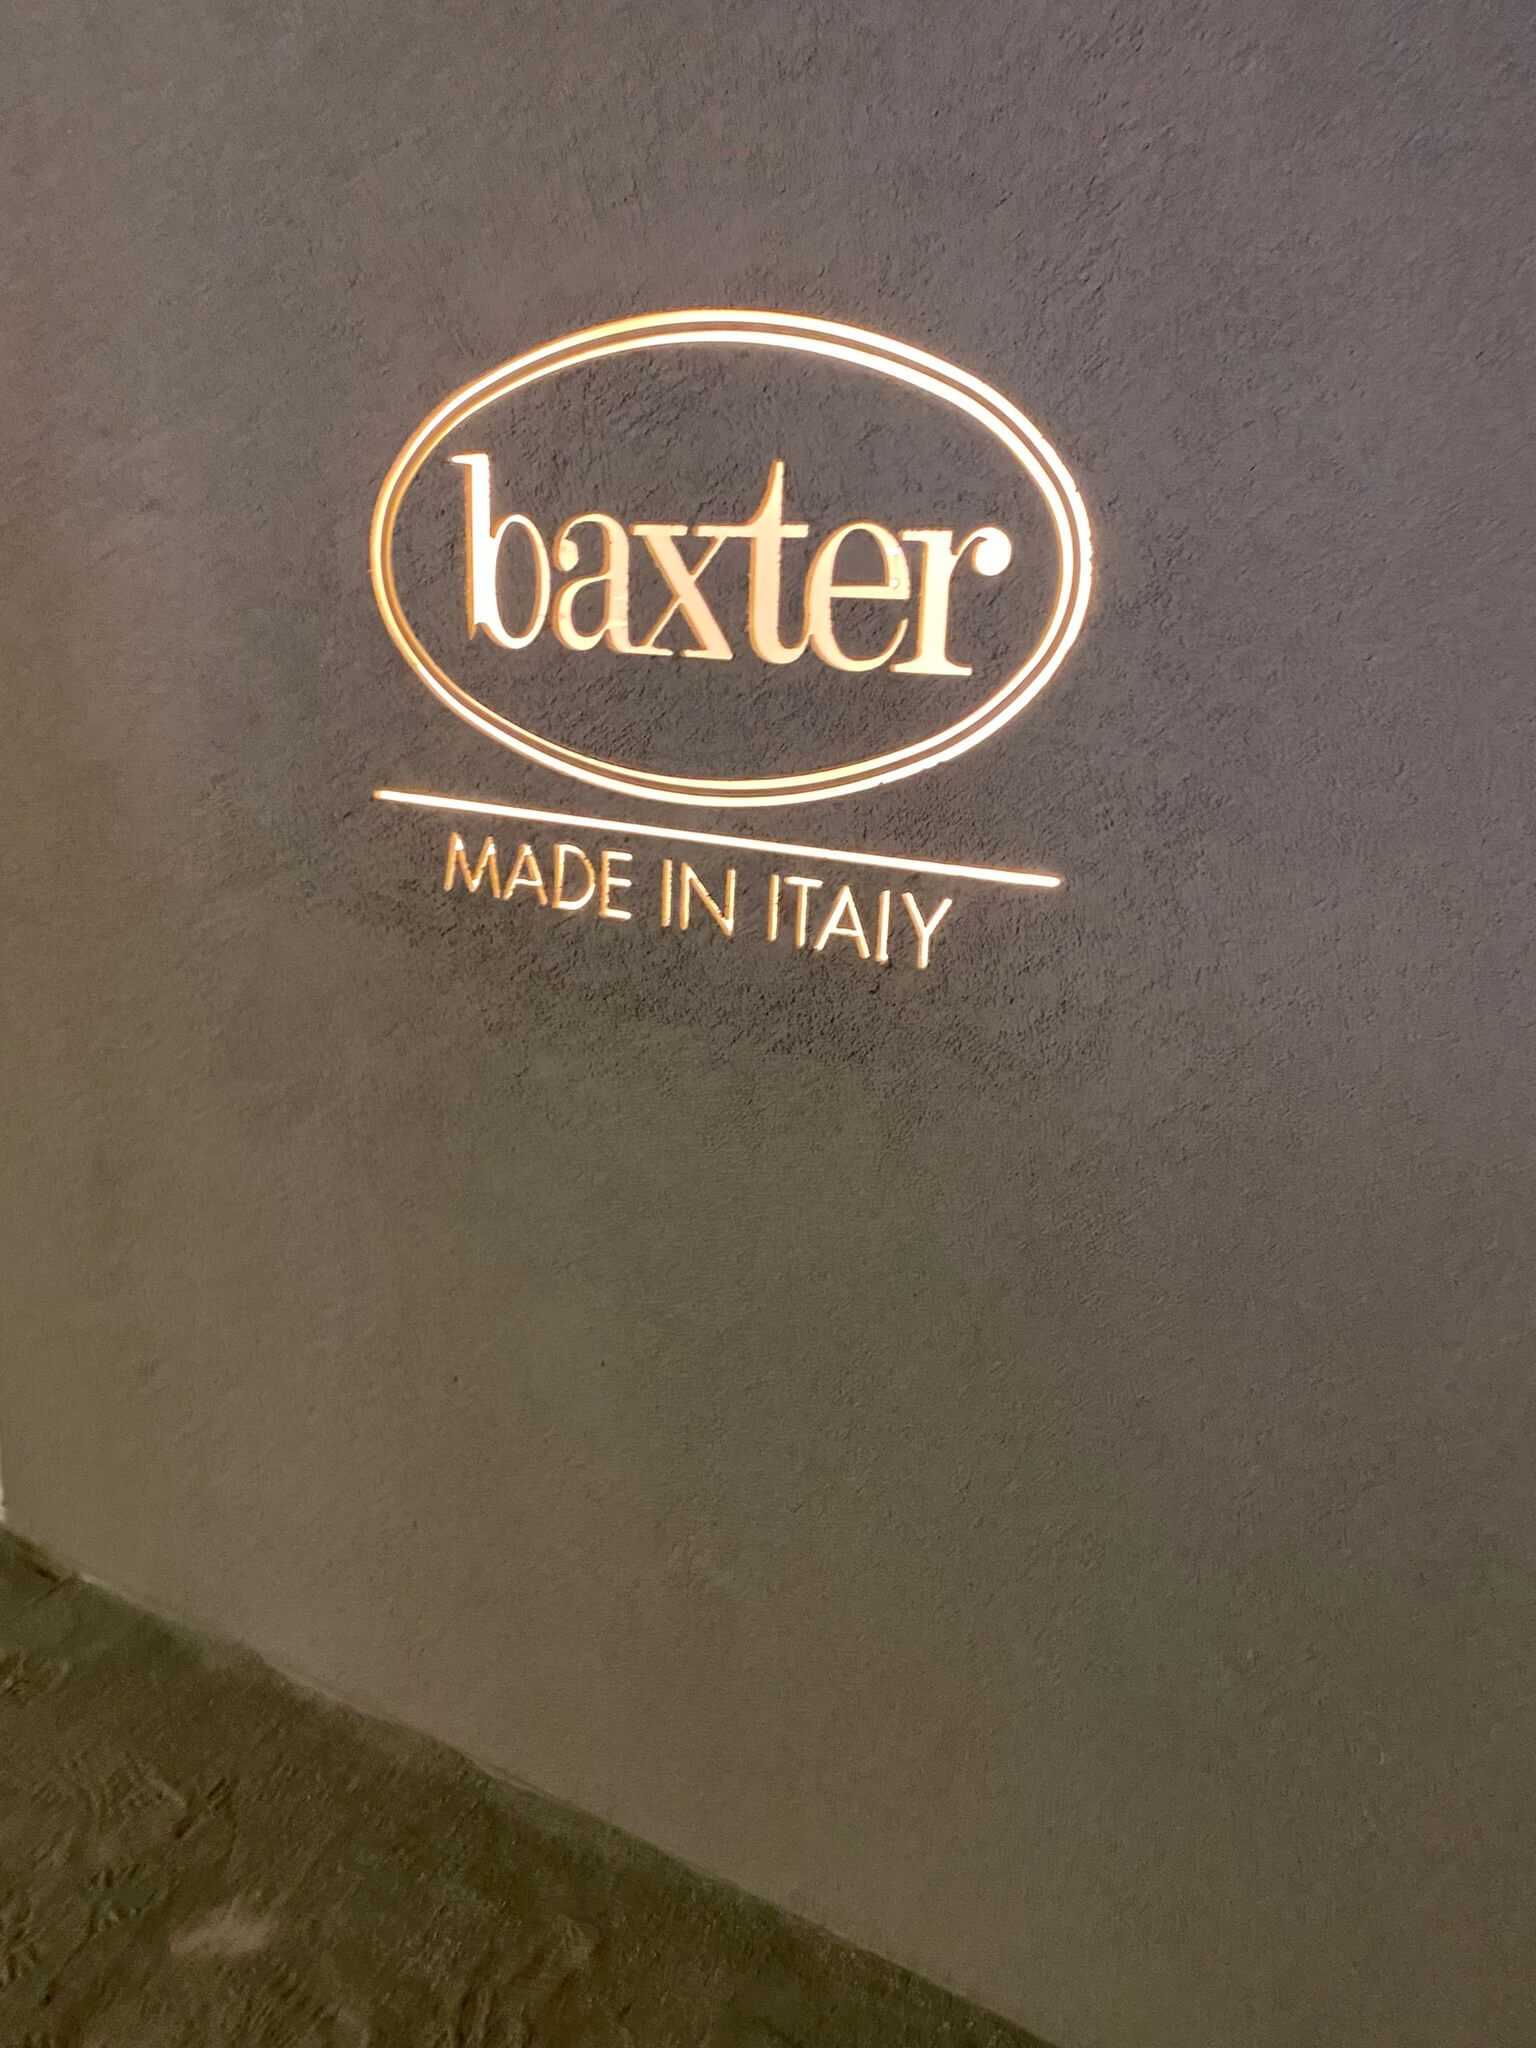 Brown wall with baxter logo - new trends at Salone del Mobile - Dean Larkin Design